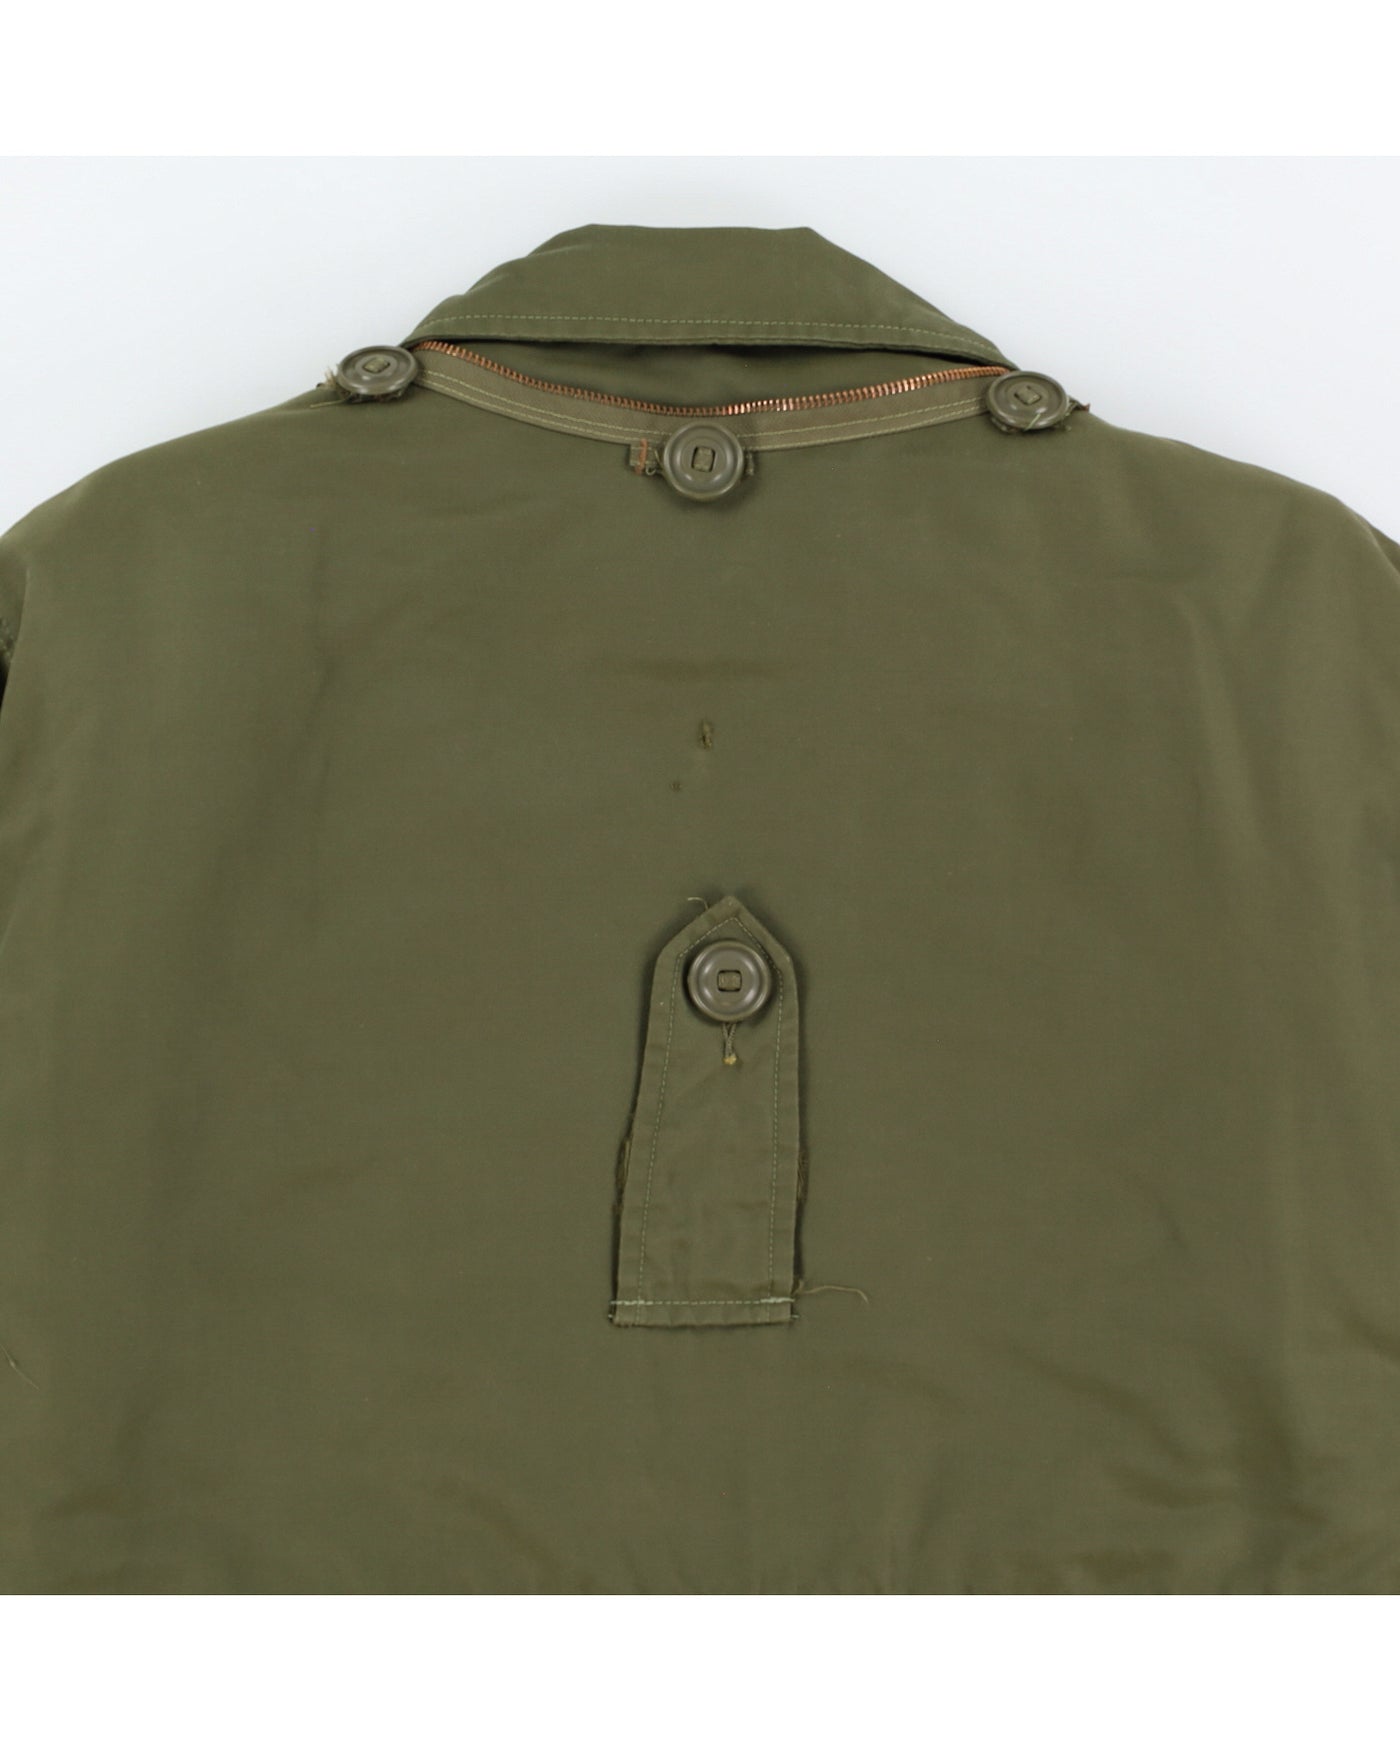 80s Canadian Army Cold Weather Parka - Small